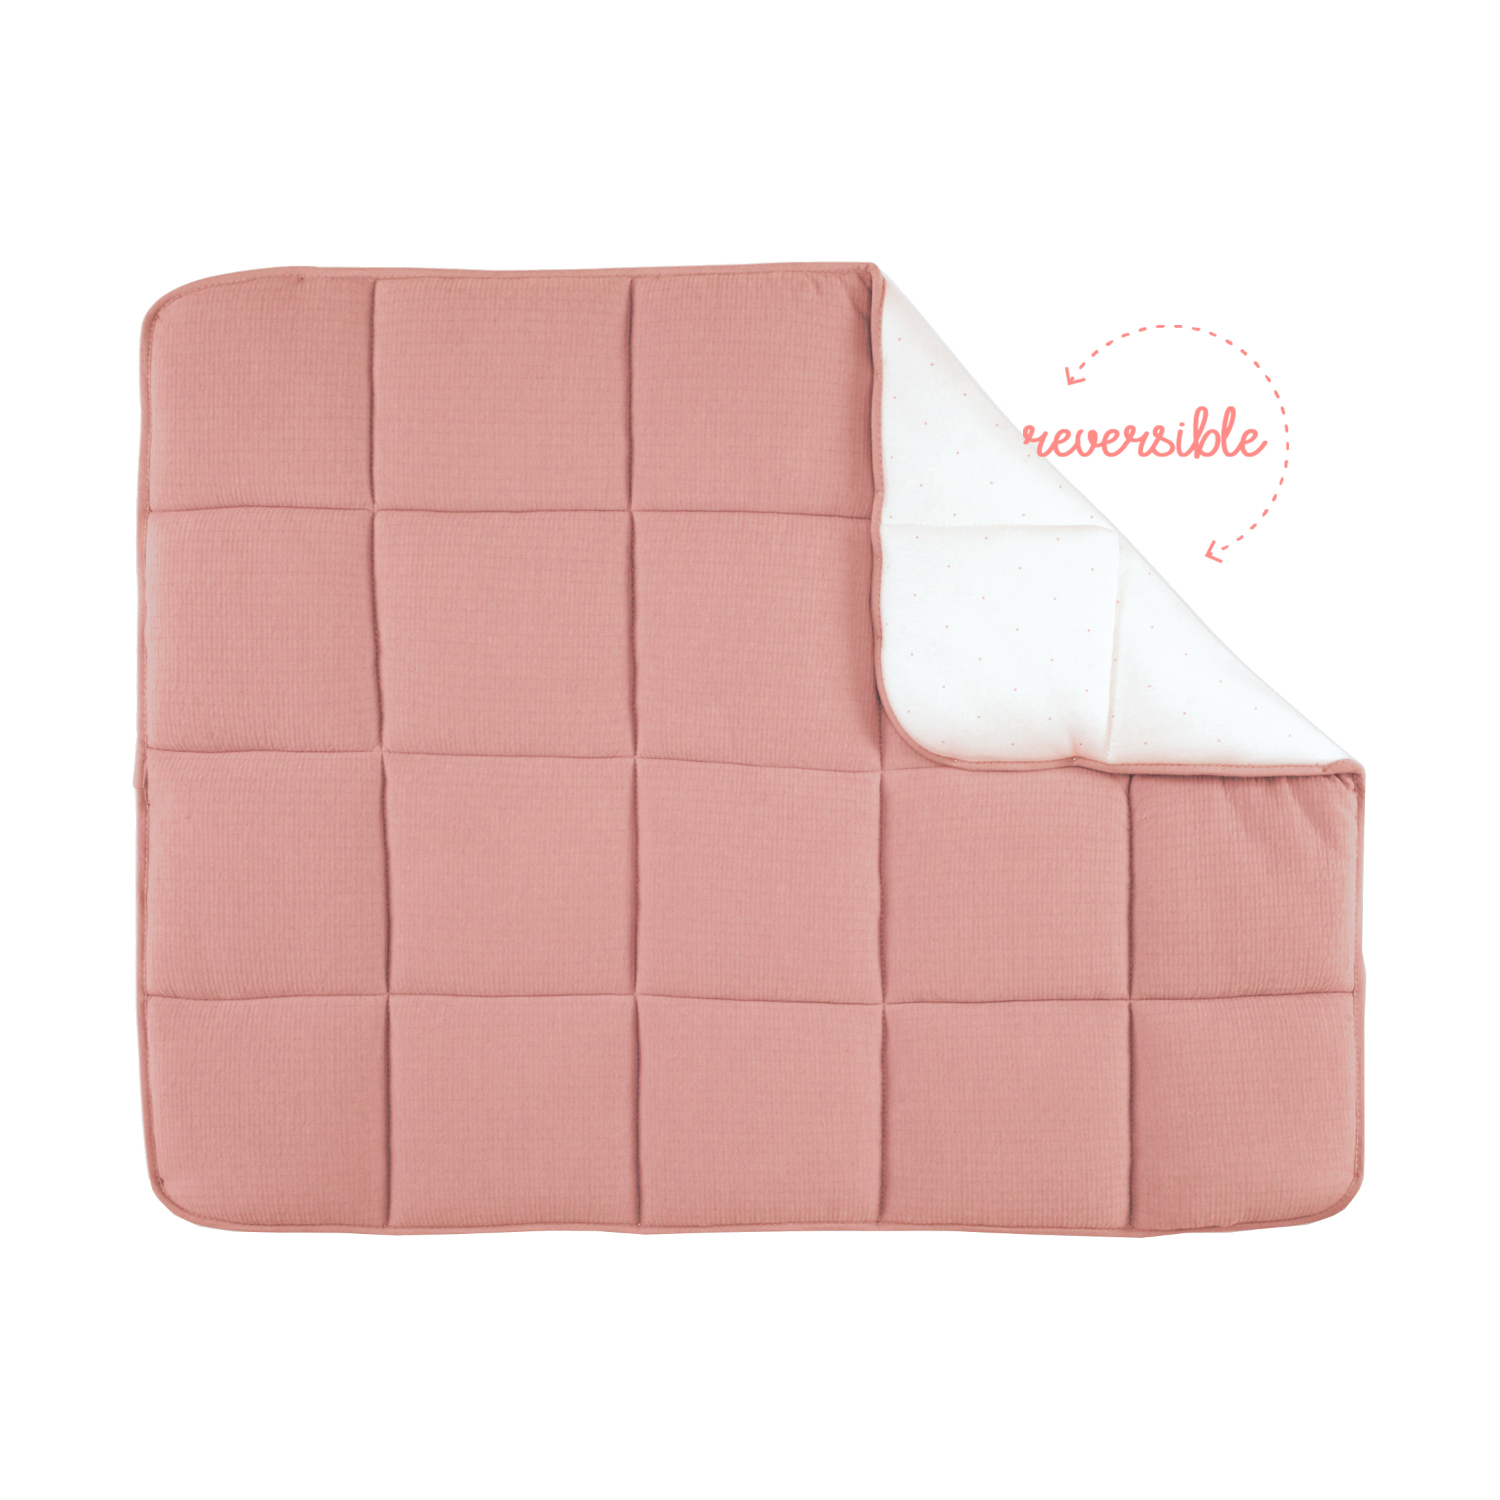 Bemini Quilted Boxkleed Sienna Bambi 75 x 95 cm roze